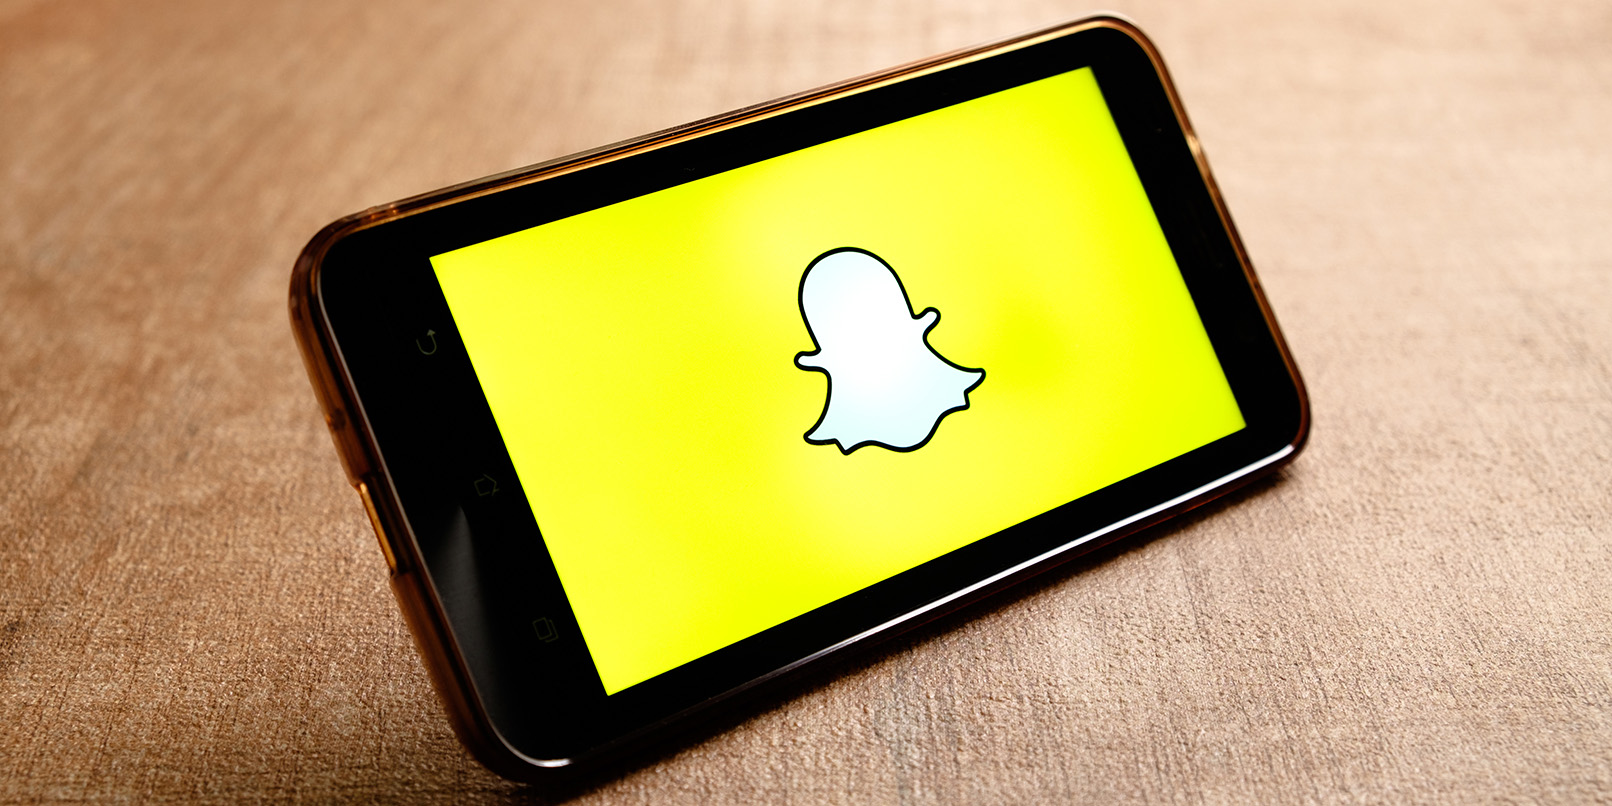 Snapchat Just Filed Quietly For One Of The Biggest IPOs